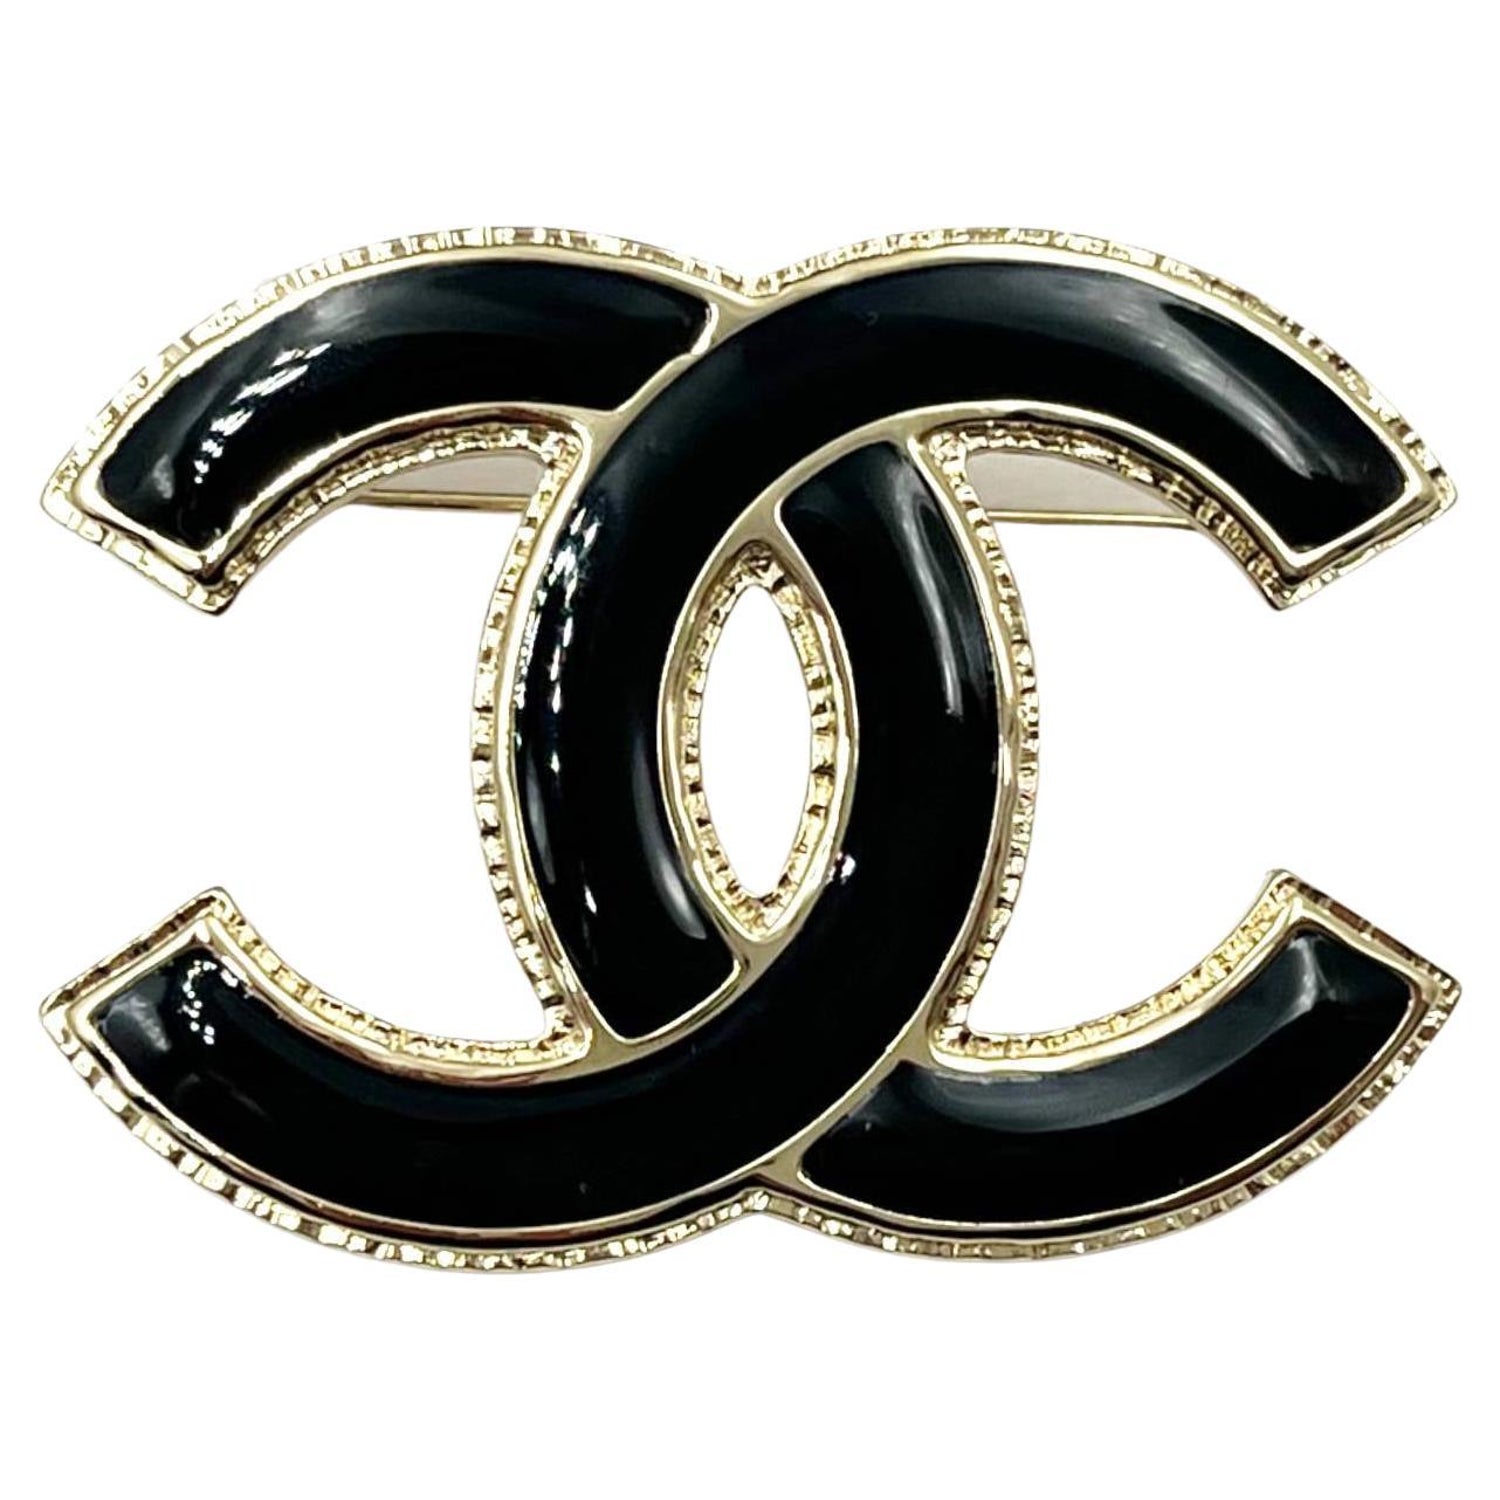 Chanel Metal Brooch AB9849 Black/Gold/Pearly White in Metal/Resin